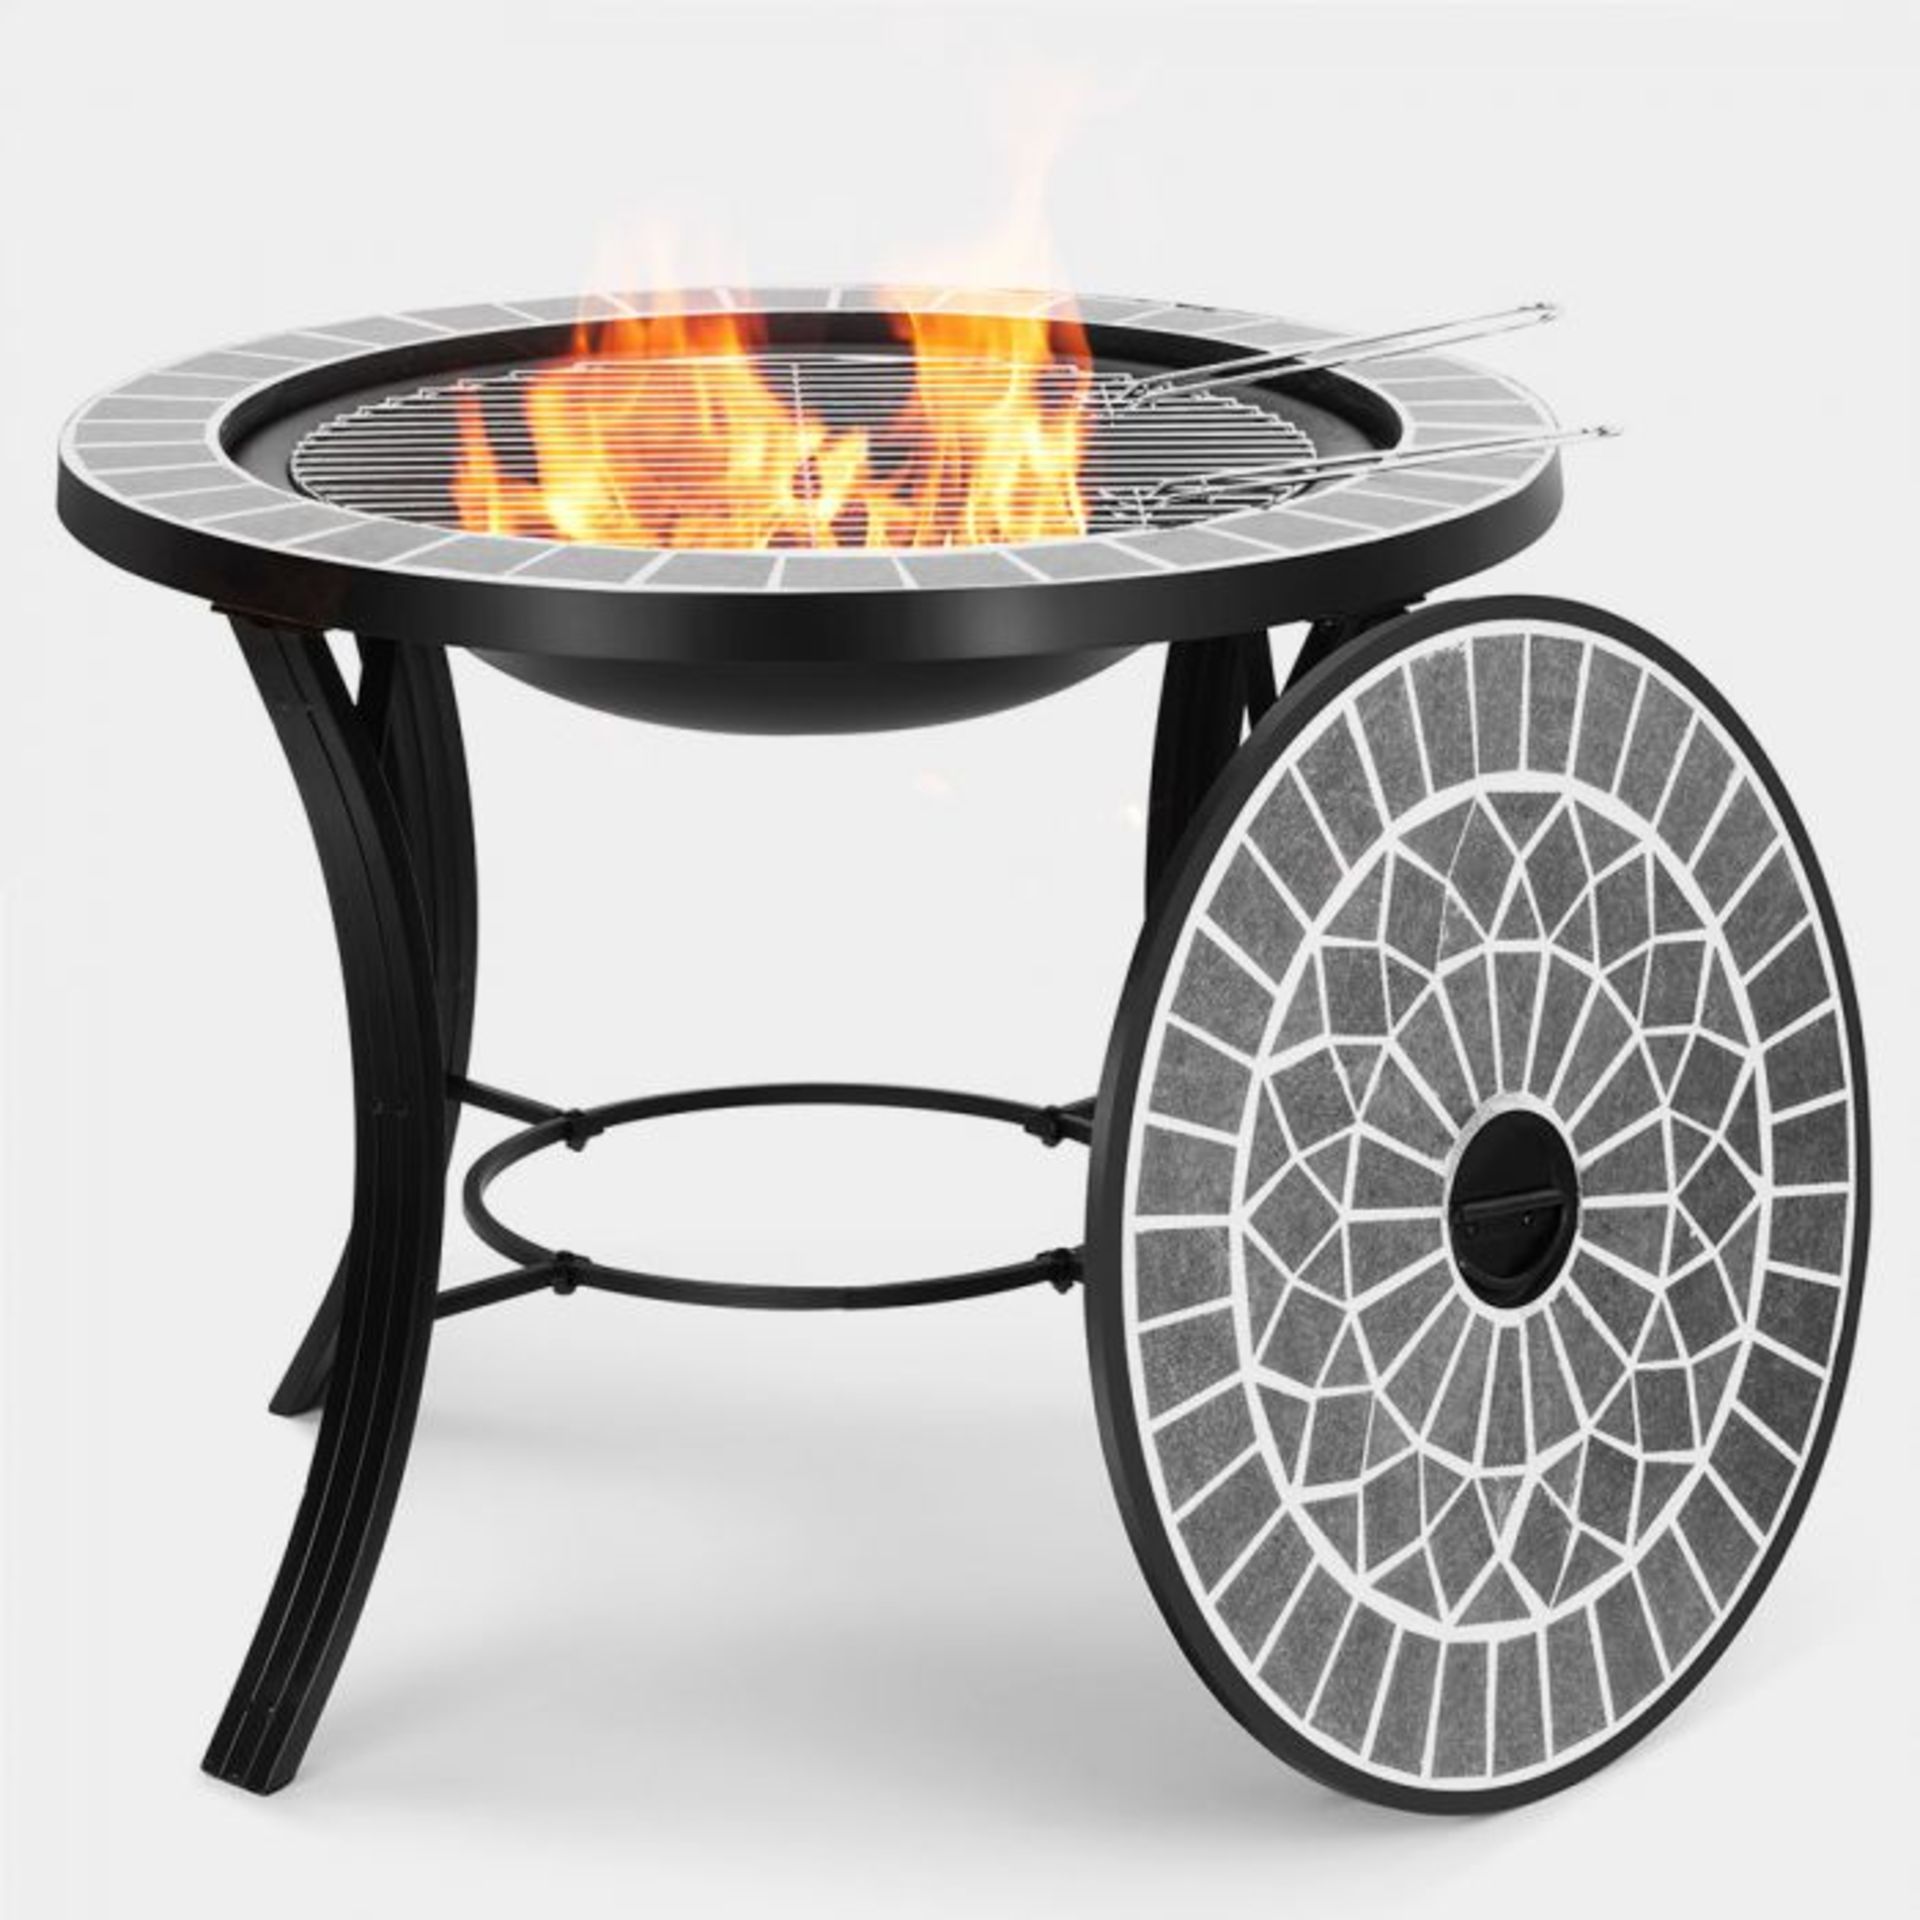 BRAND NEW Dark Grey Mosaic Fire Pit, Bring traditional, rustic style to your space, as well as